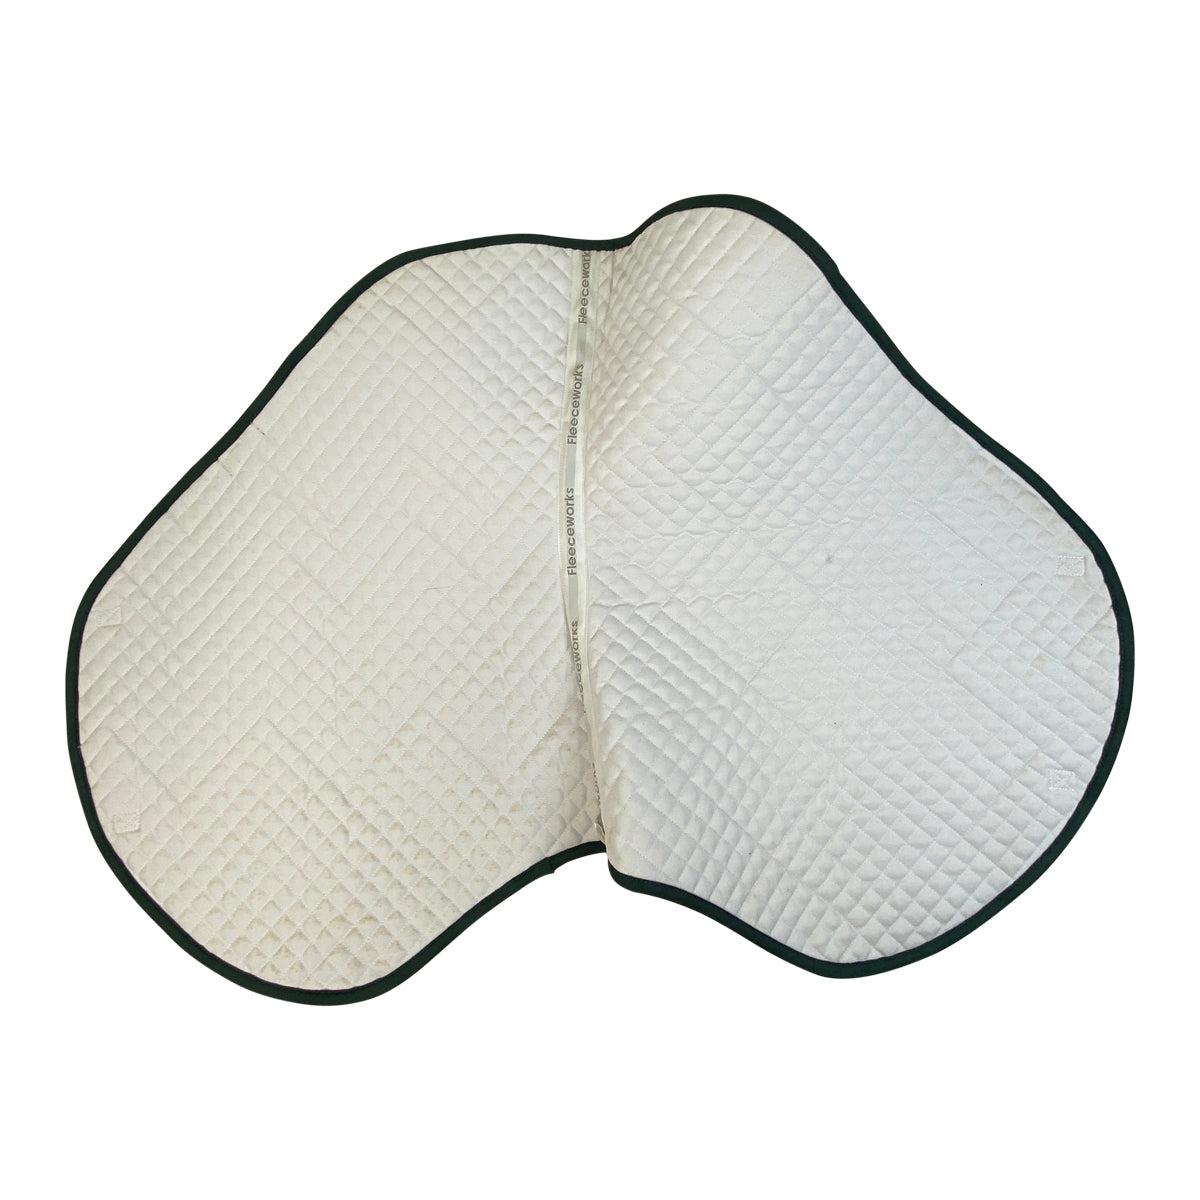 Fleeceworks Easy Care Bamboo Contour XC Pad in White w/Green